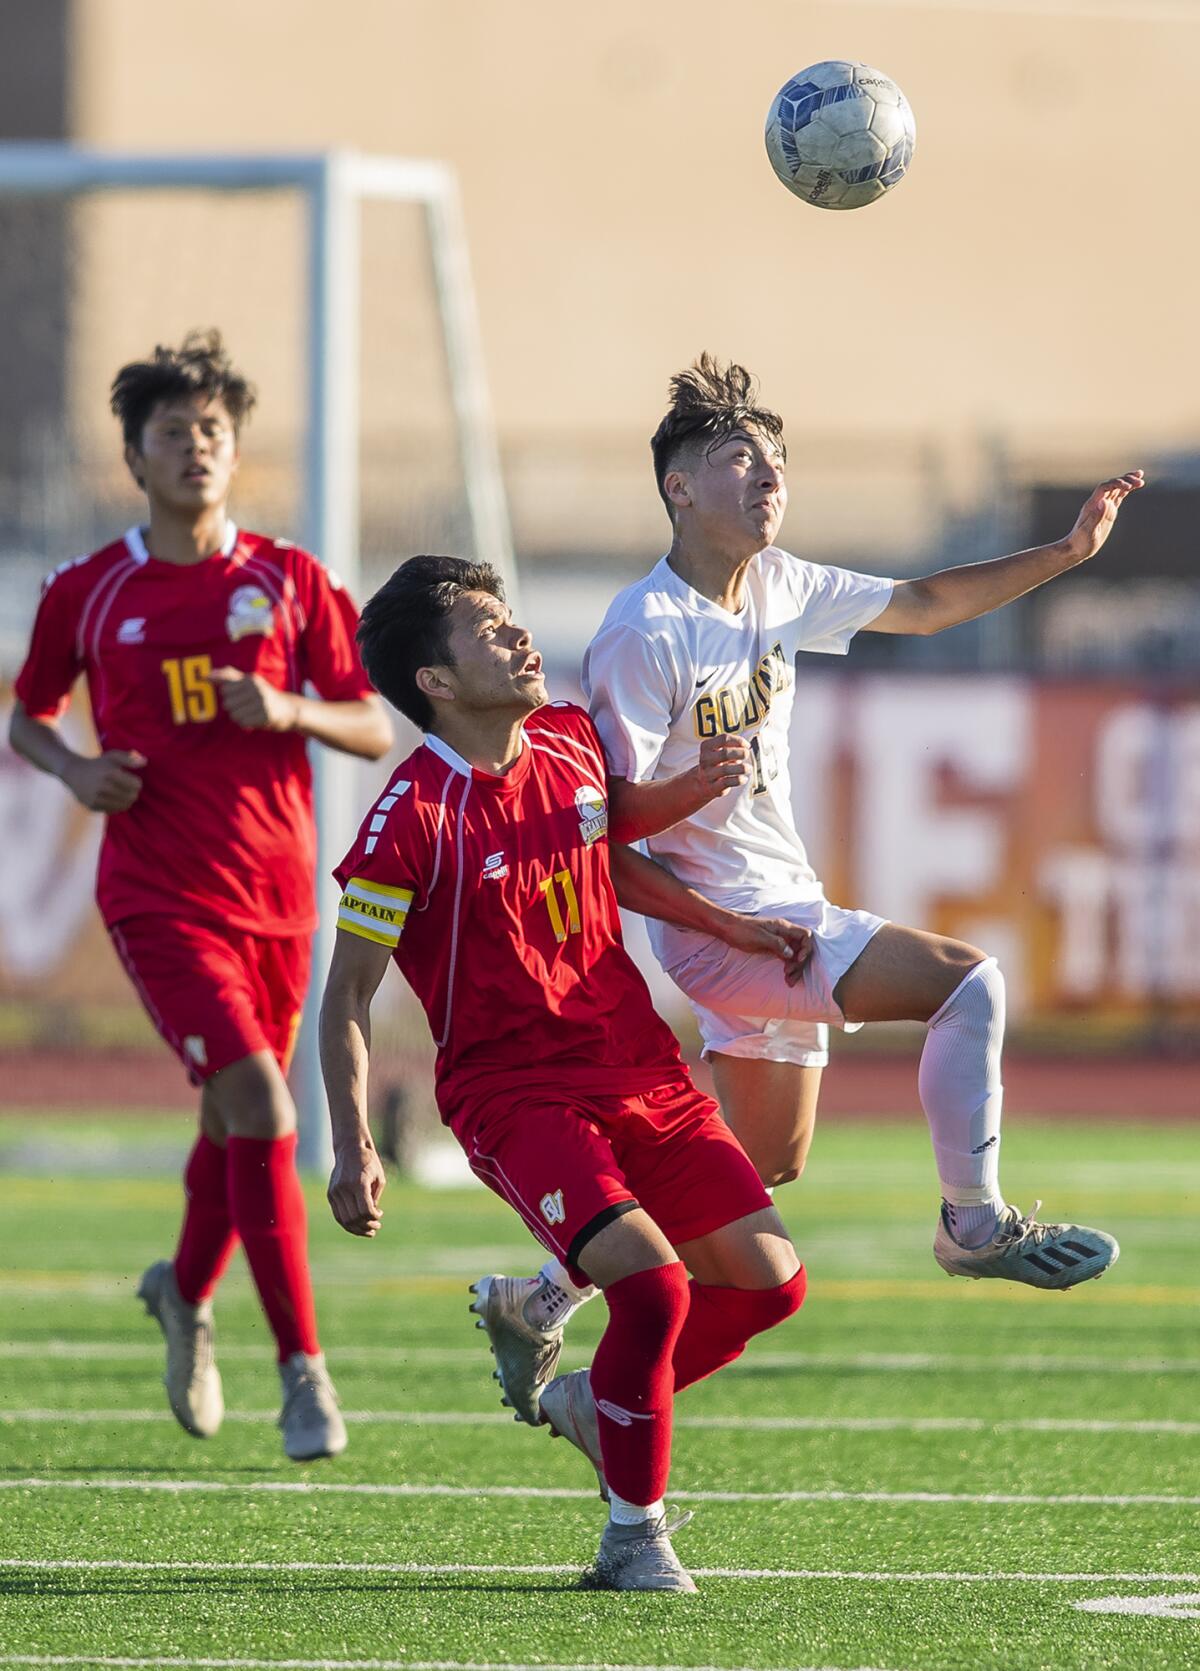 Ocean View's Juan Salazar (11) goes up for a header against Godinez's Andrew Arroyo (15) during a Golden West League match on Wednesday in Huntington Beach.